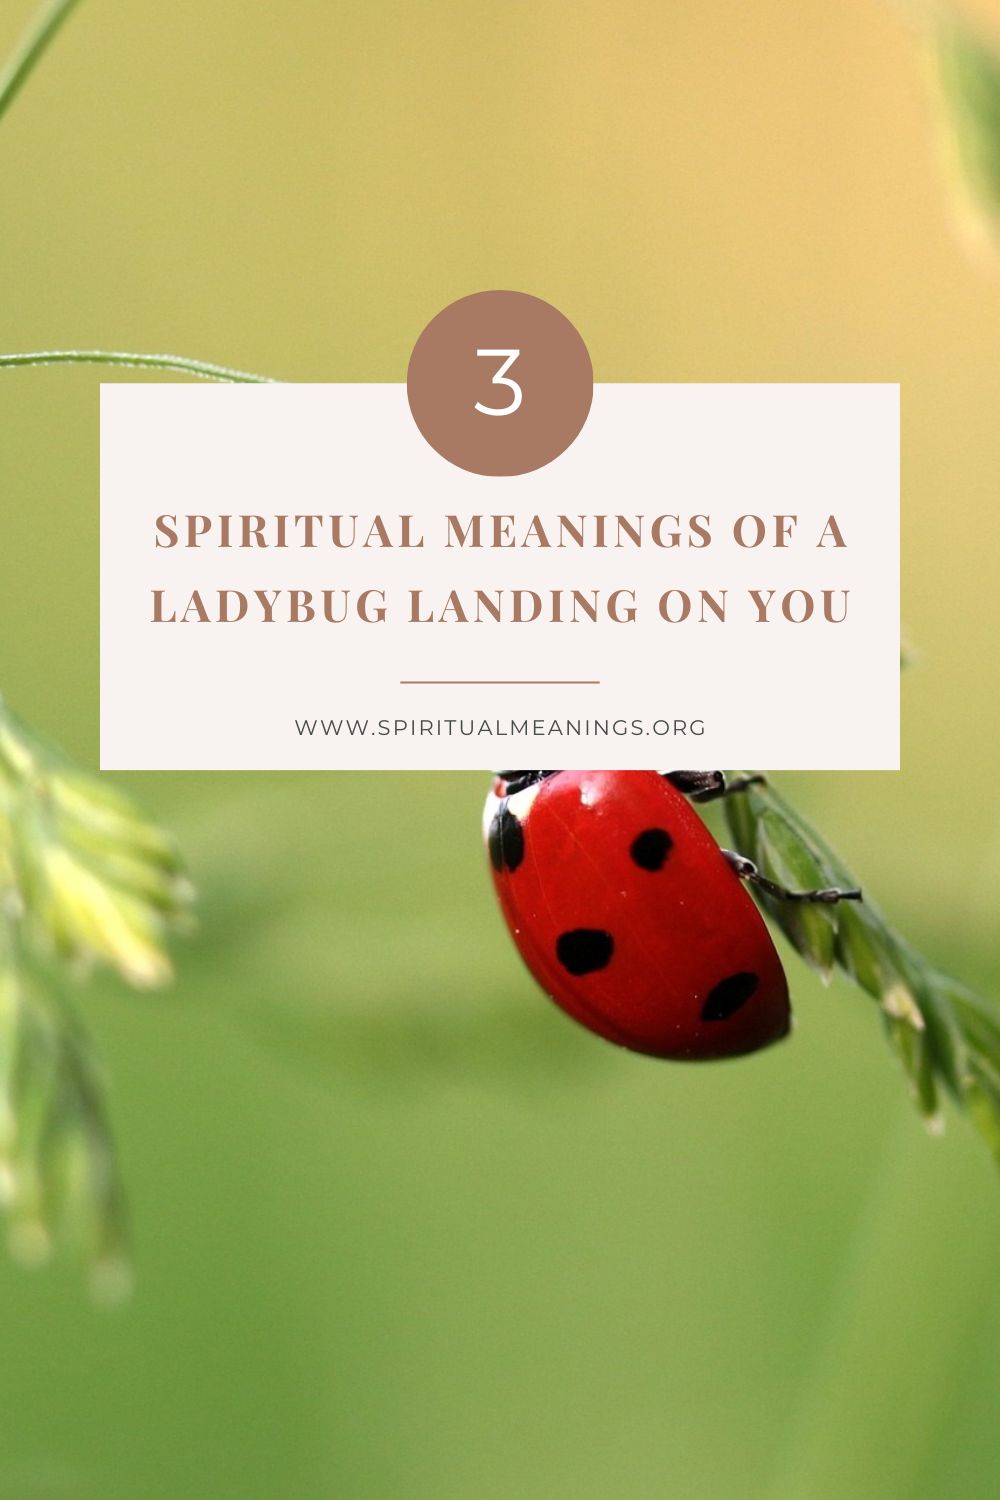 What Does It Mean When a Ladybug Lands on You? (Spiritual Meanings)